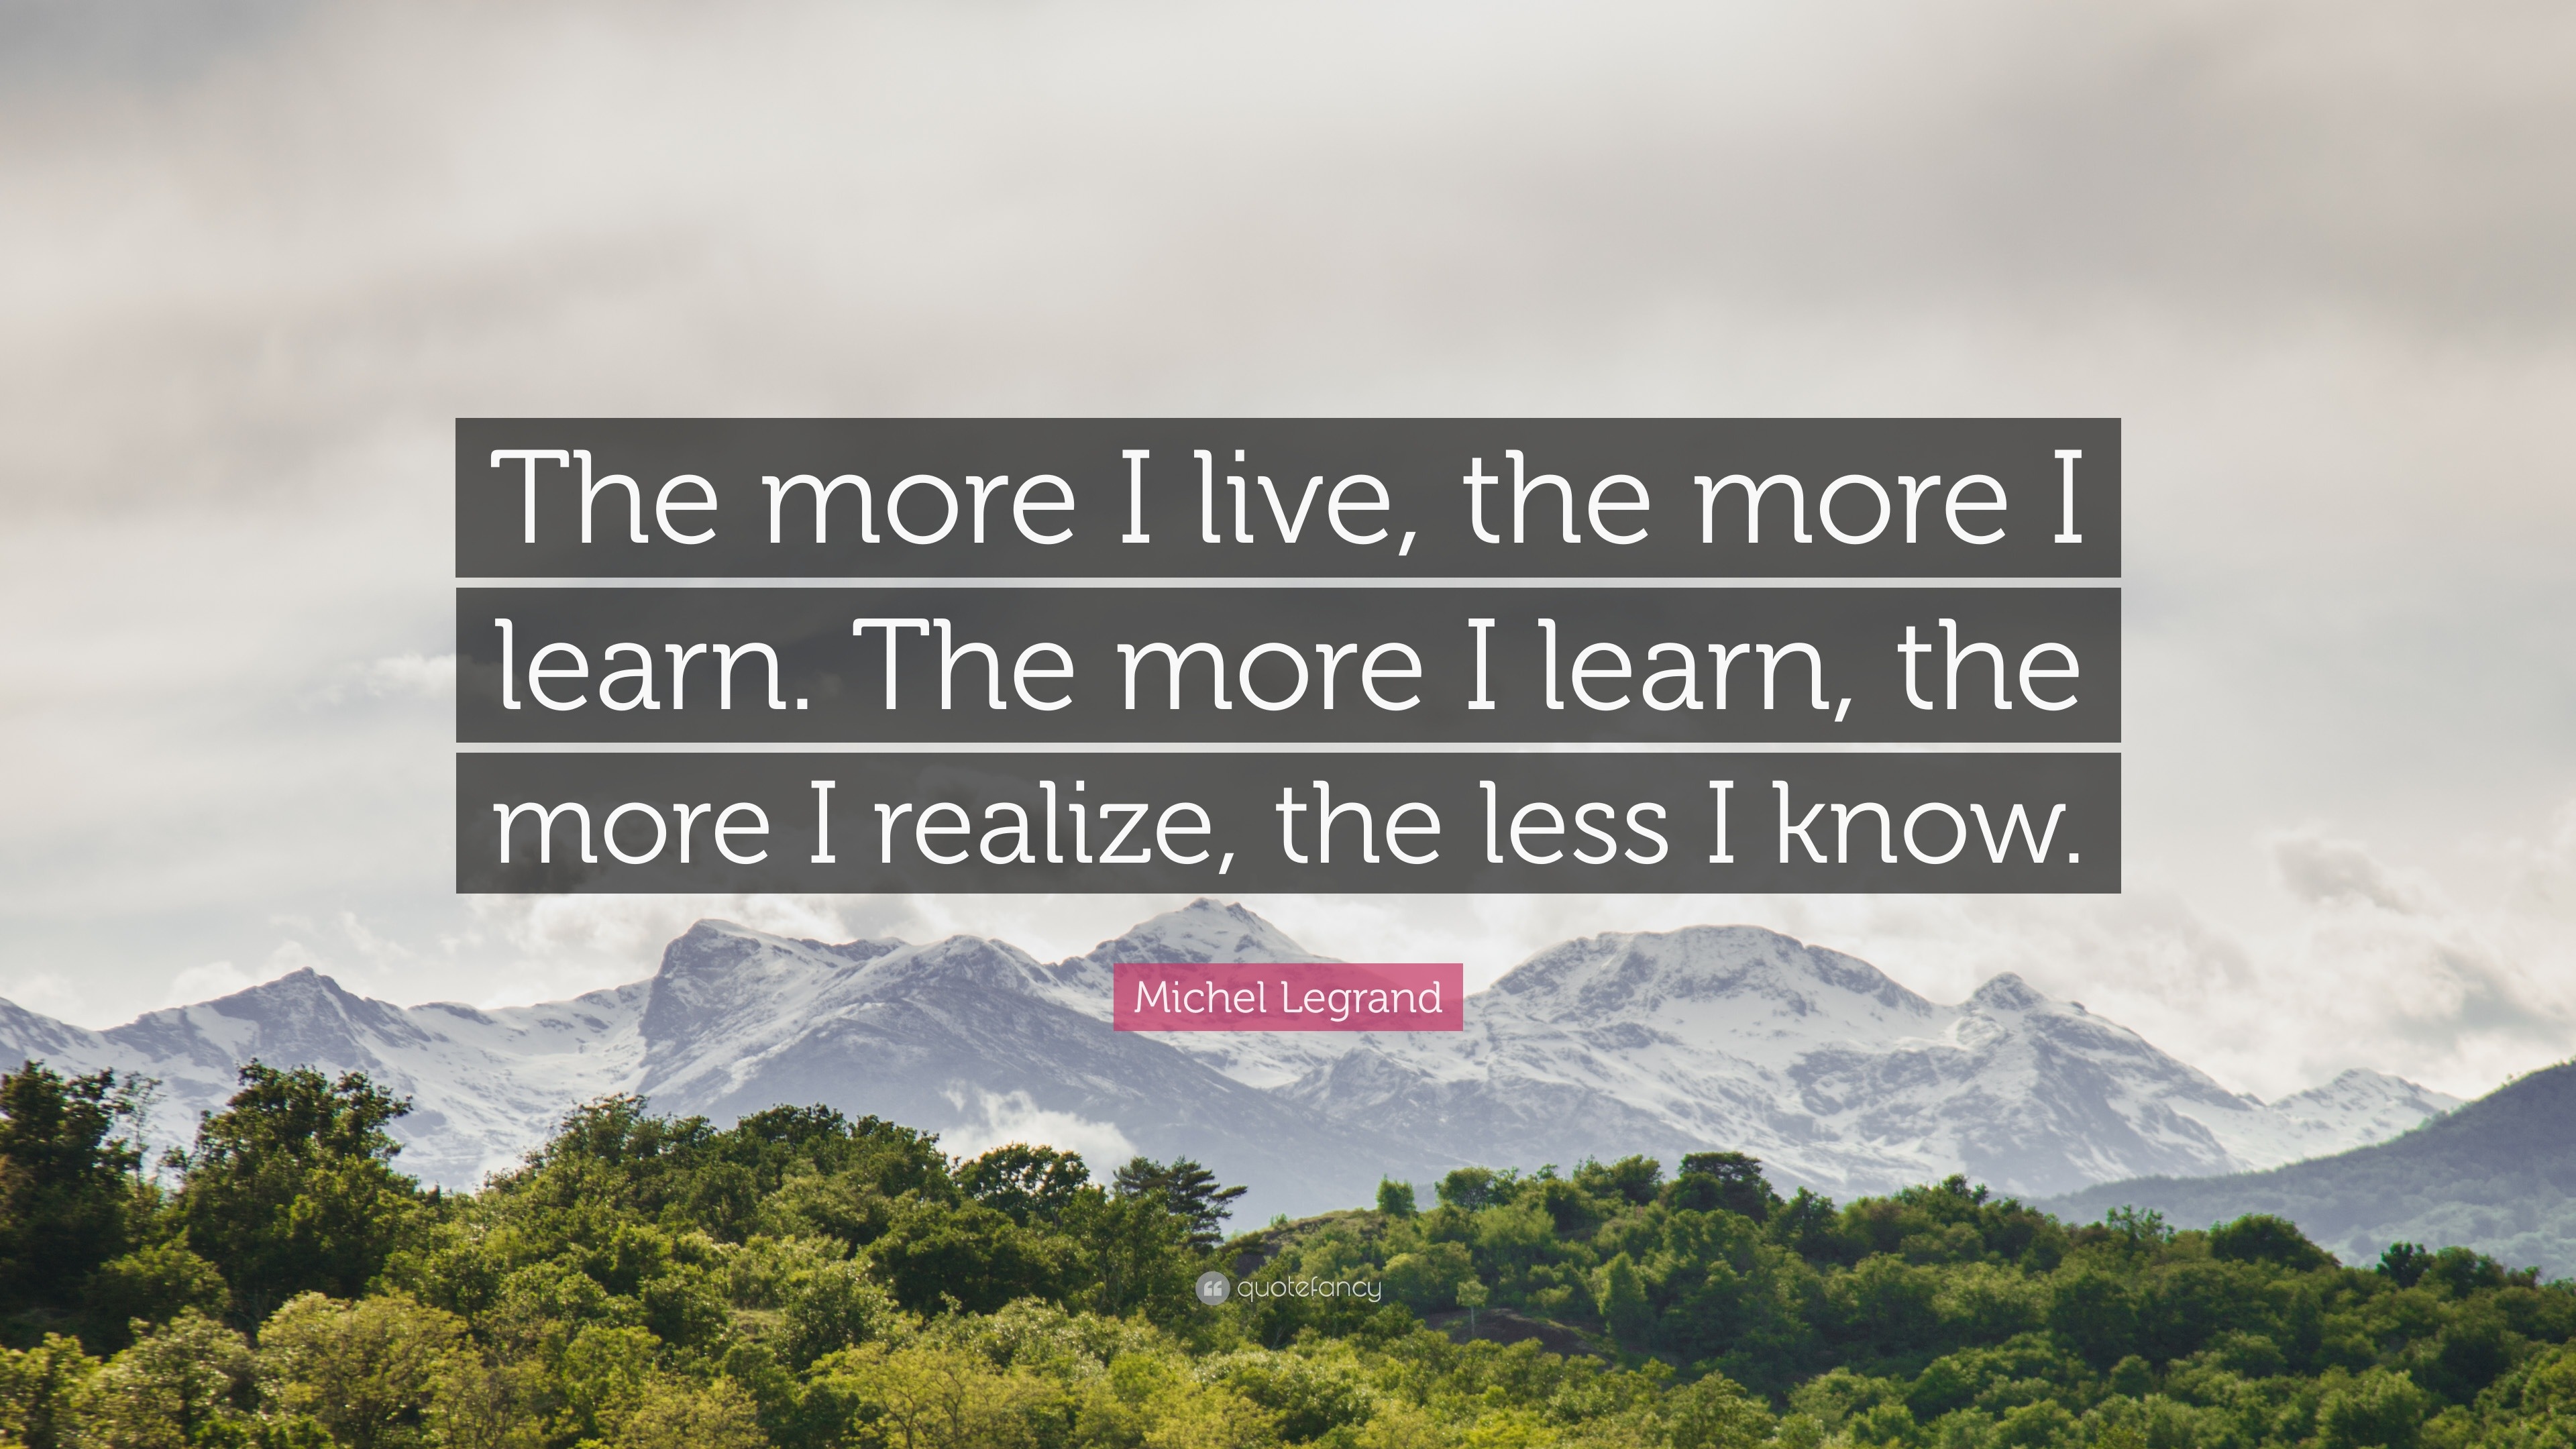 Michel Legrand Quote: “The more I live, the more I learn. The more I ...